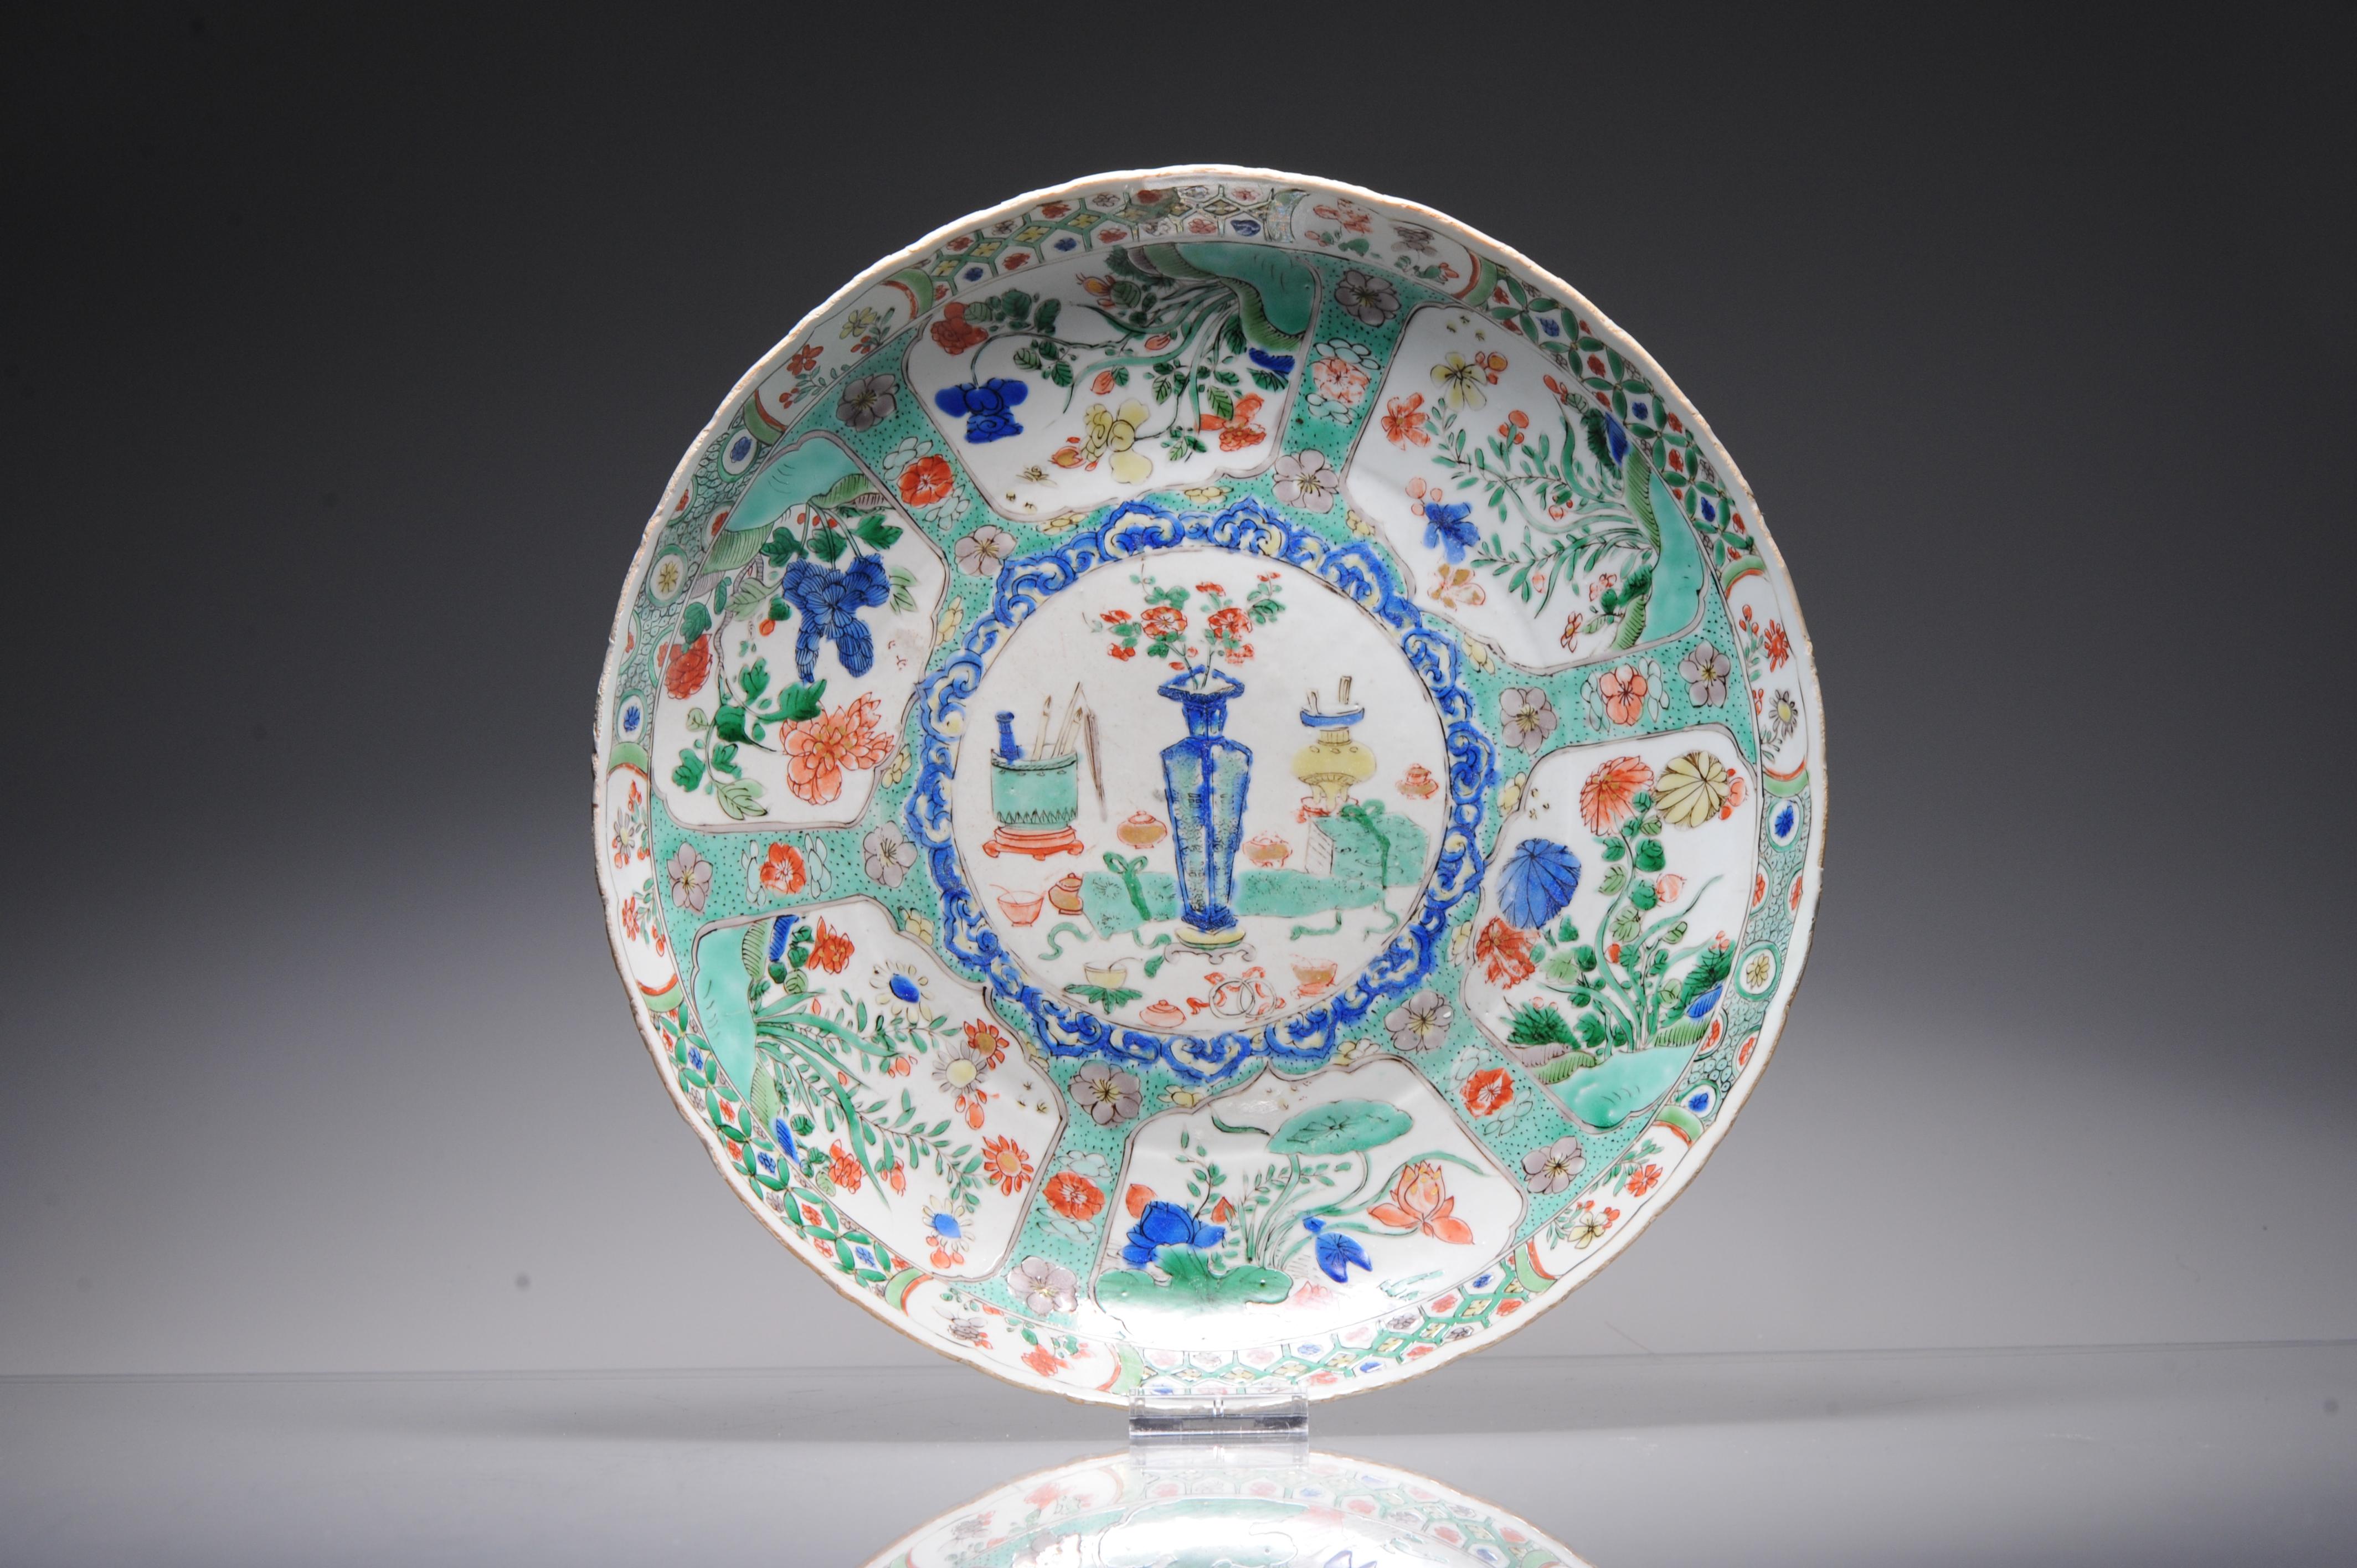 Description
A Large 'Chinese Verte' export porcelain deep dish
Kangxi period
Painted with enamels of the famille verte palette with reserves of flowers, Trees and in the centre a flower basket and various objects. The exterior walls with